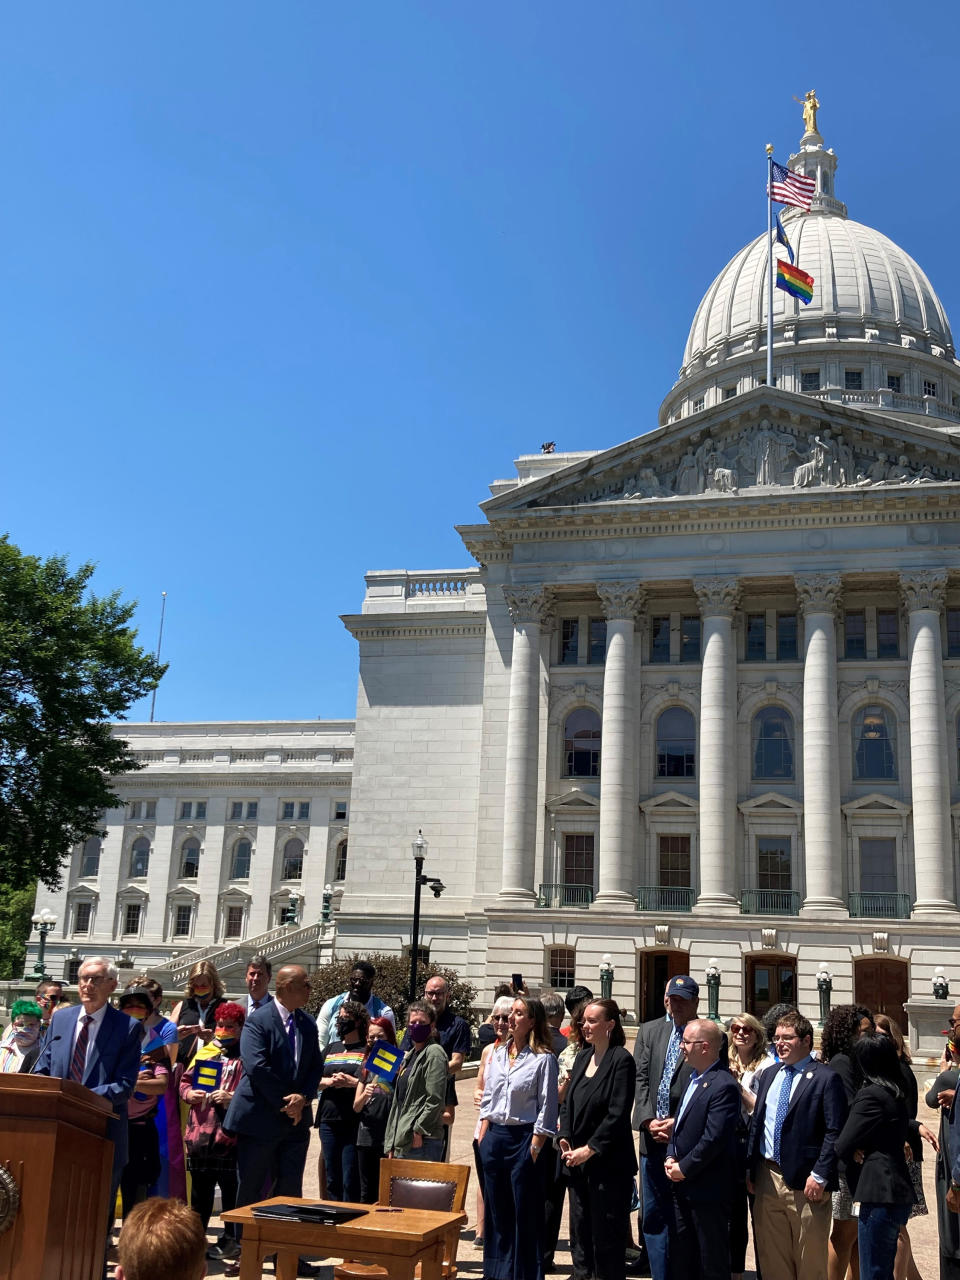 Wisconsin Gov. Tony Evers, at the podium, said he's not ruling out vetoing the entire state budget on Tuesday, June 1, 2021, in Madison, Wis. Evers spoke after a ceremony to raise the rainbow gay pride flag outside the state Capitol in recognition of gay pride month in June in Madison. (AP Photo Scott Bauer)